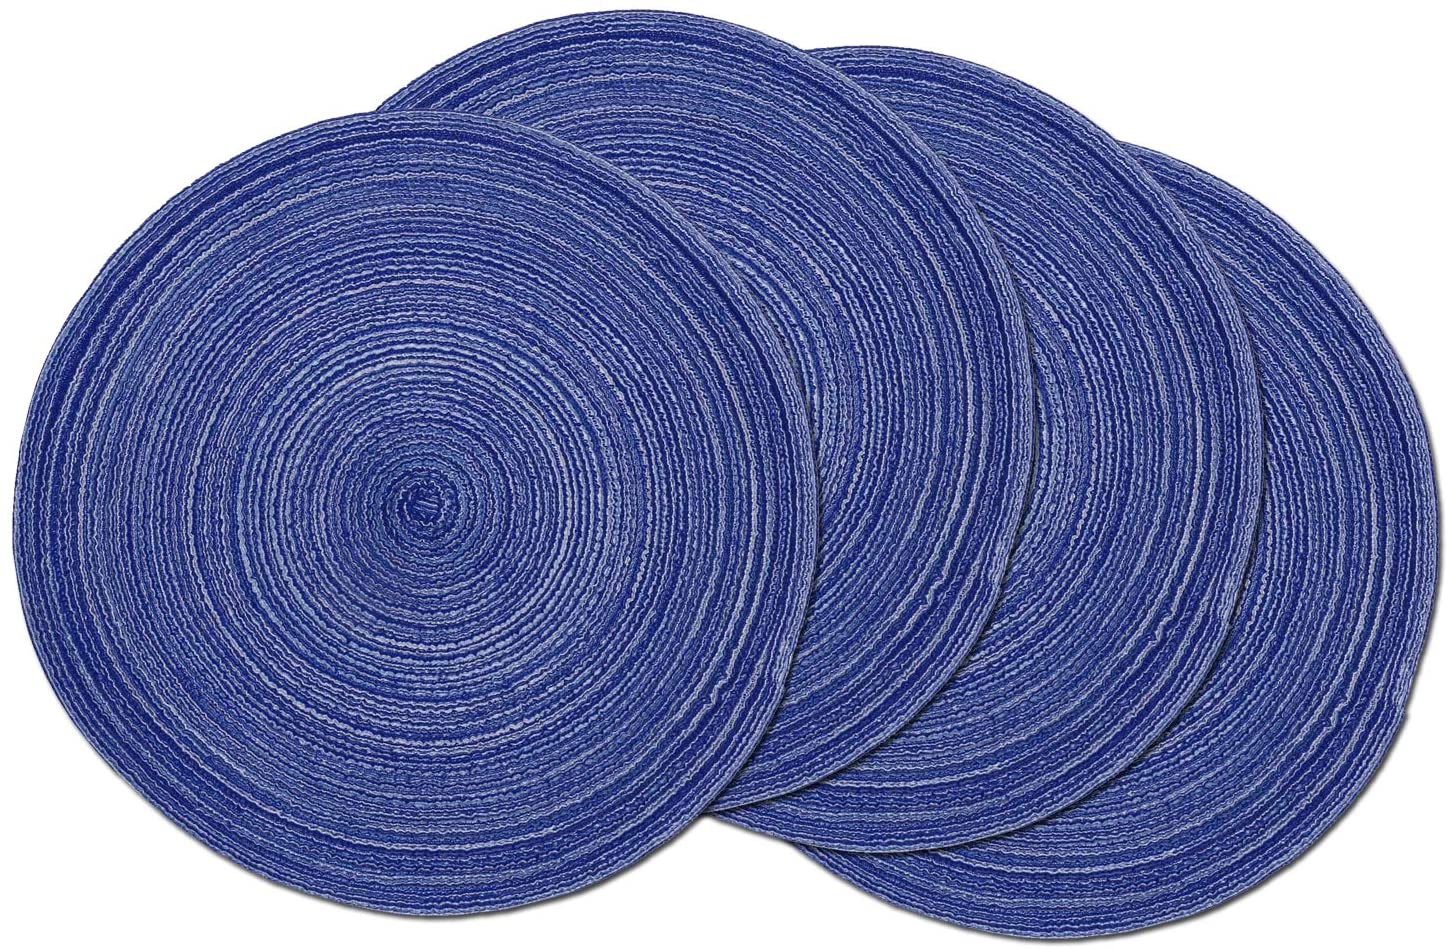 SHACOS Round Braided Placemats Set of 6 Washable Round Placemats for Kitchen Tab